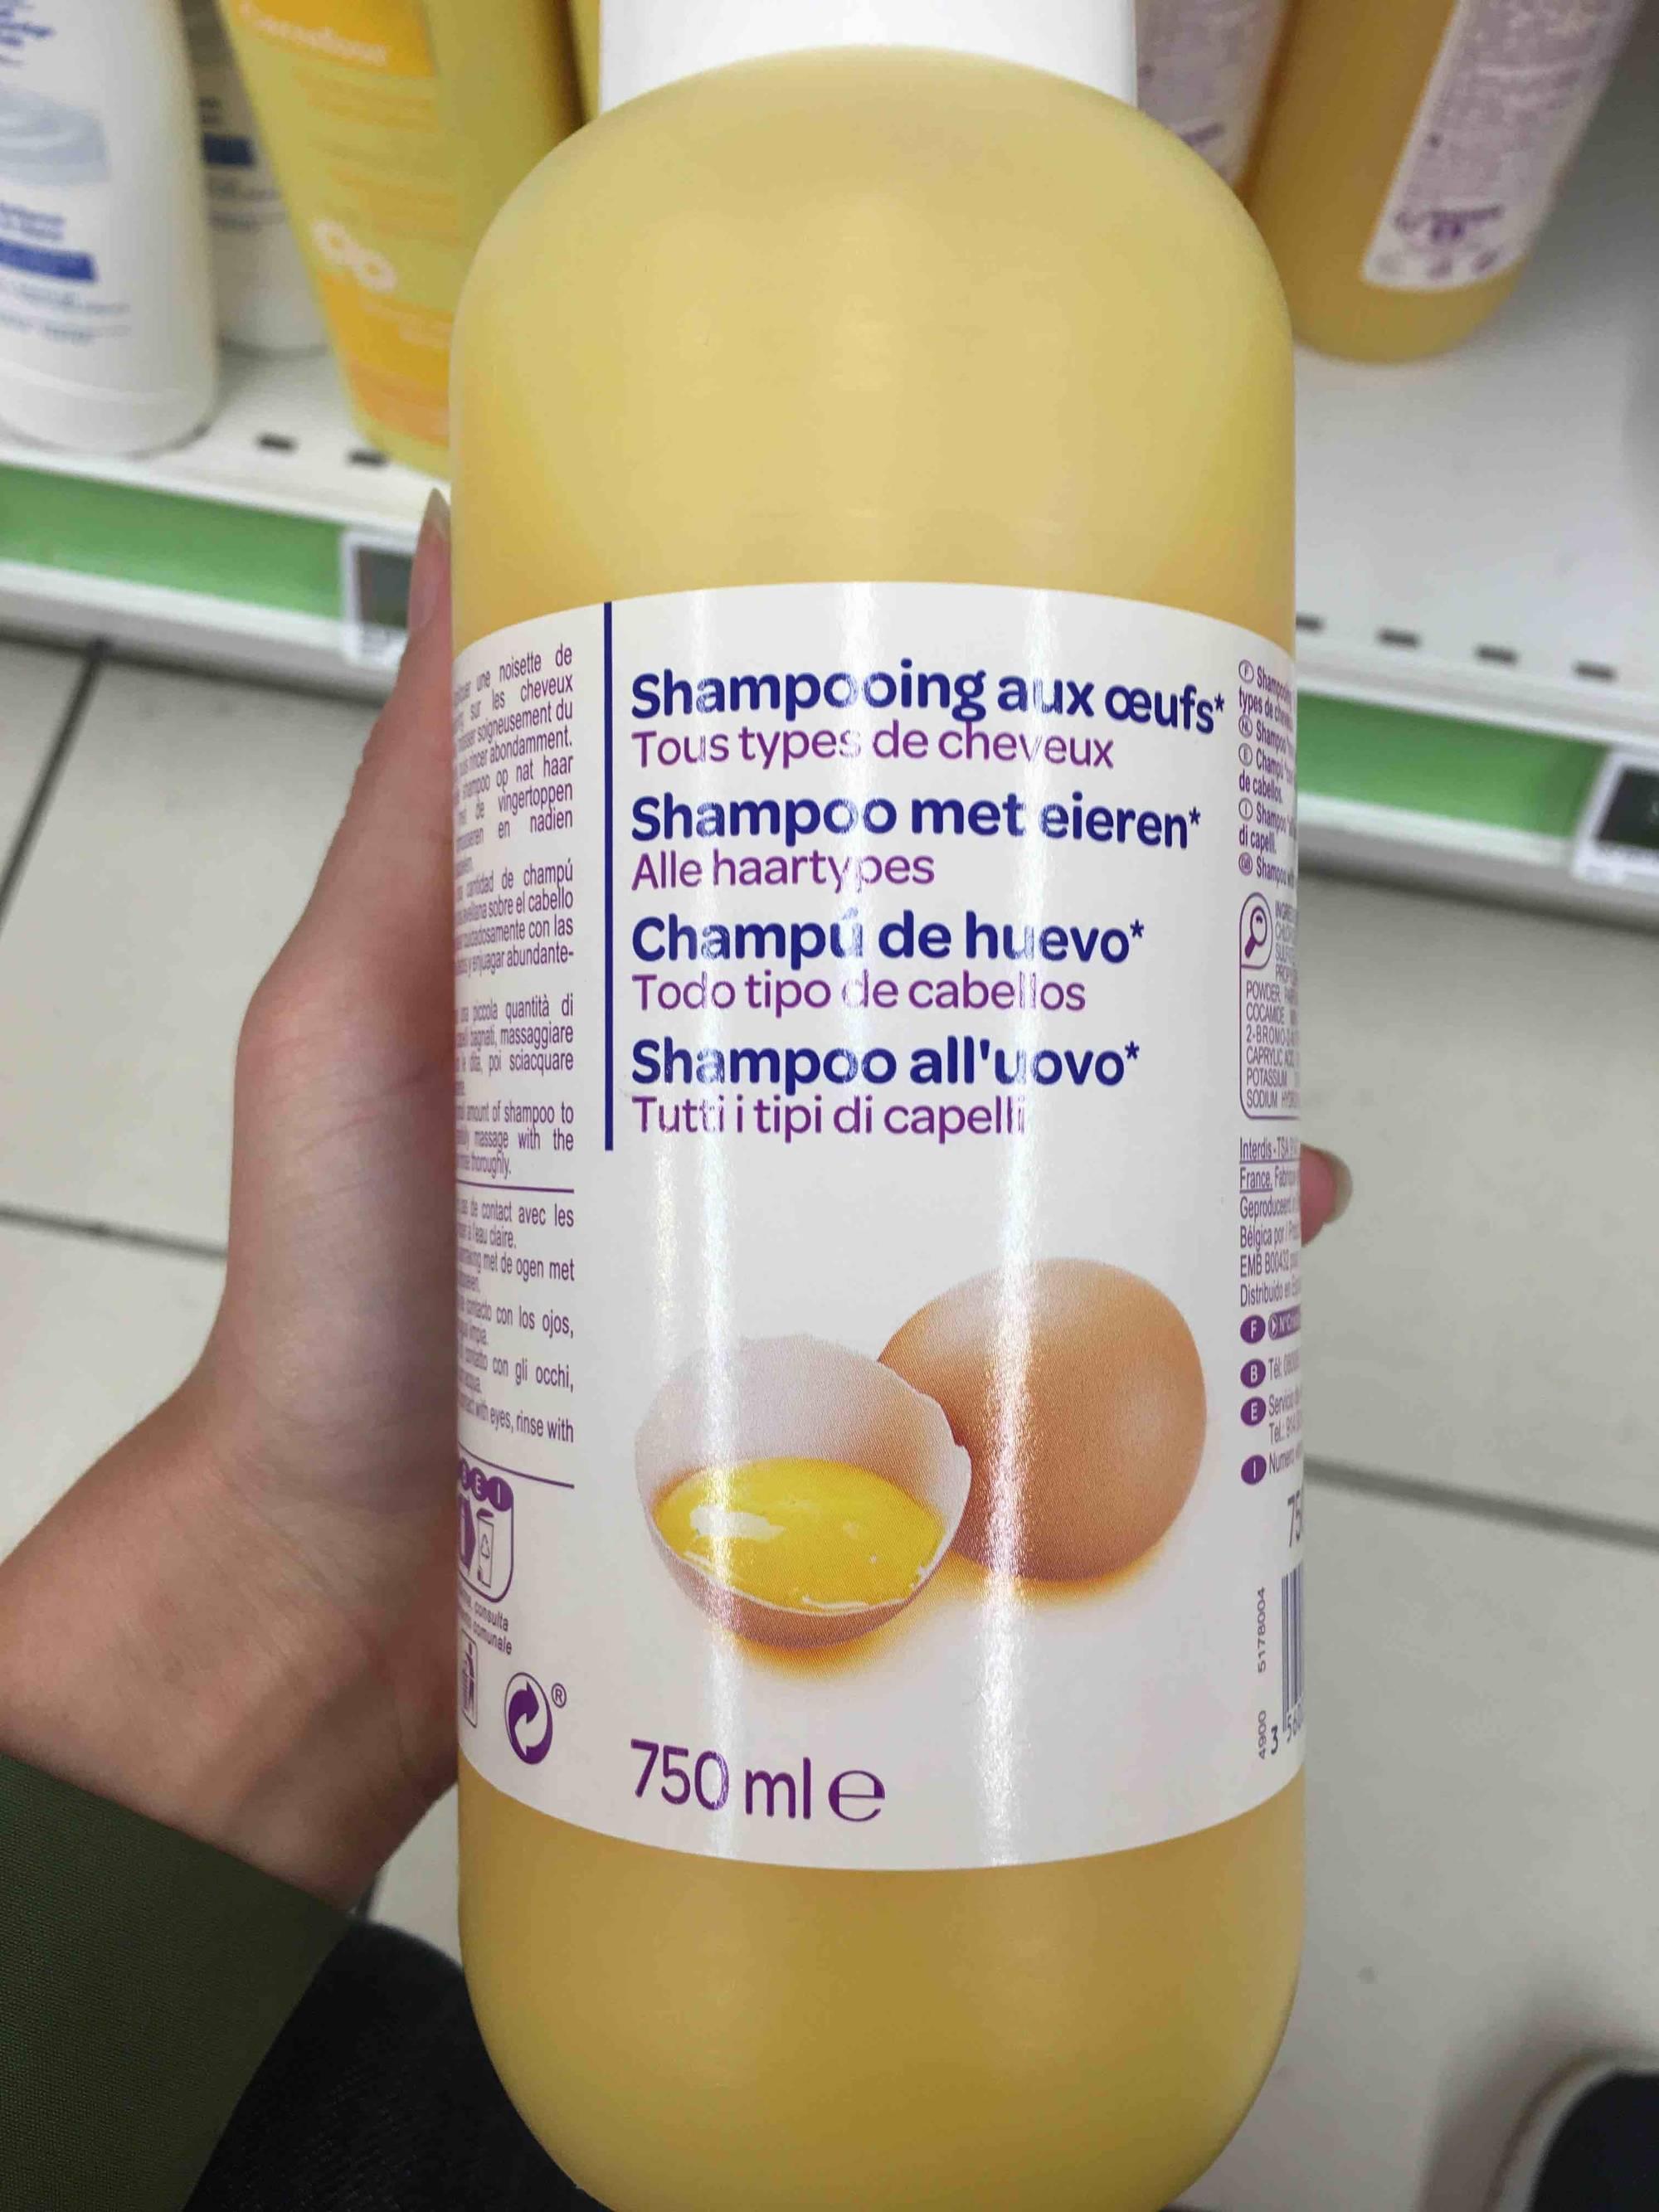 ISABEL - Shampooing aux oeufs